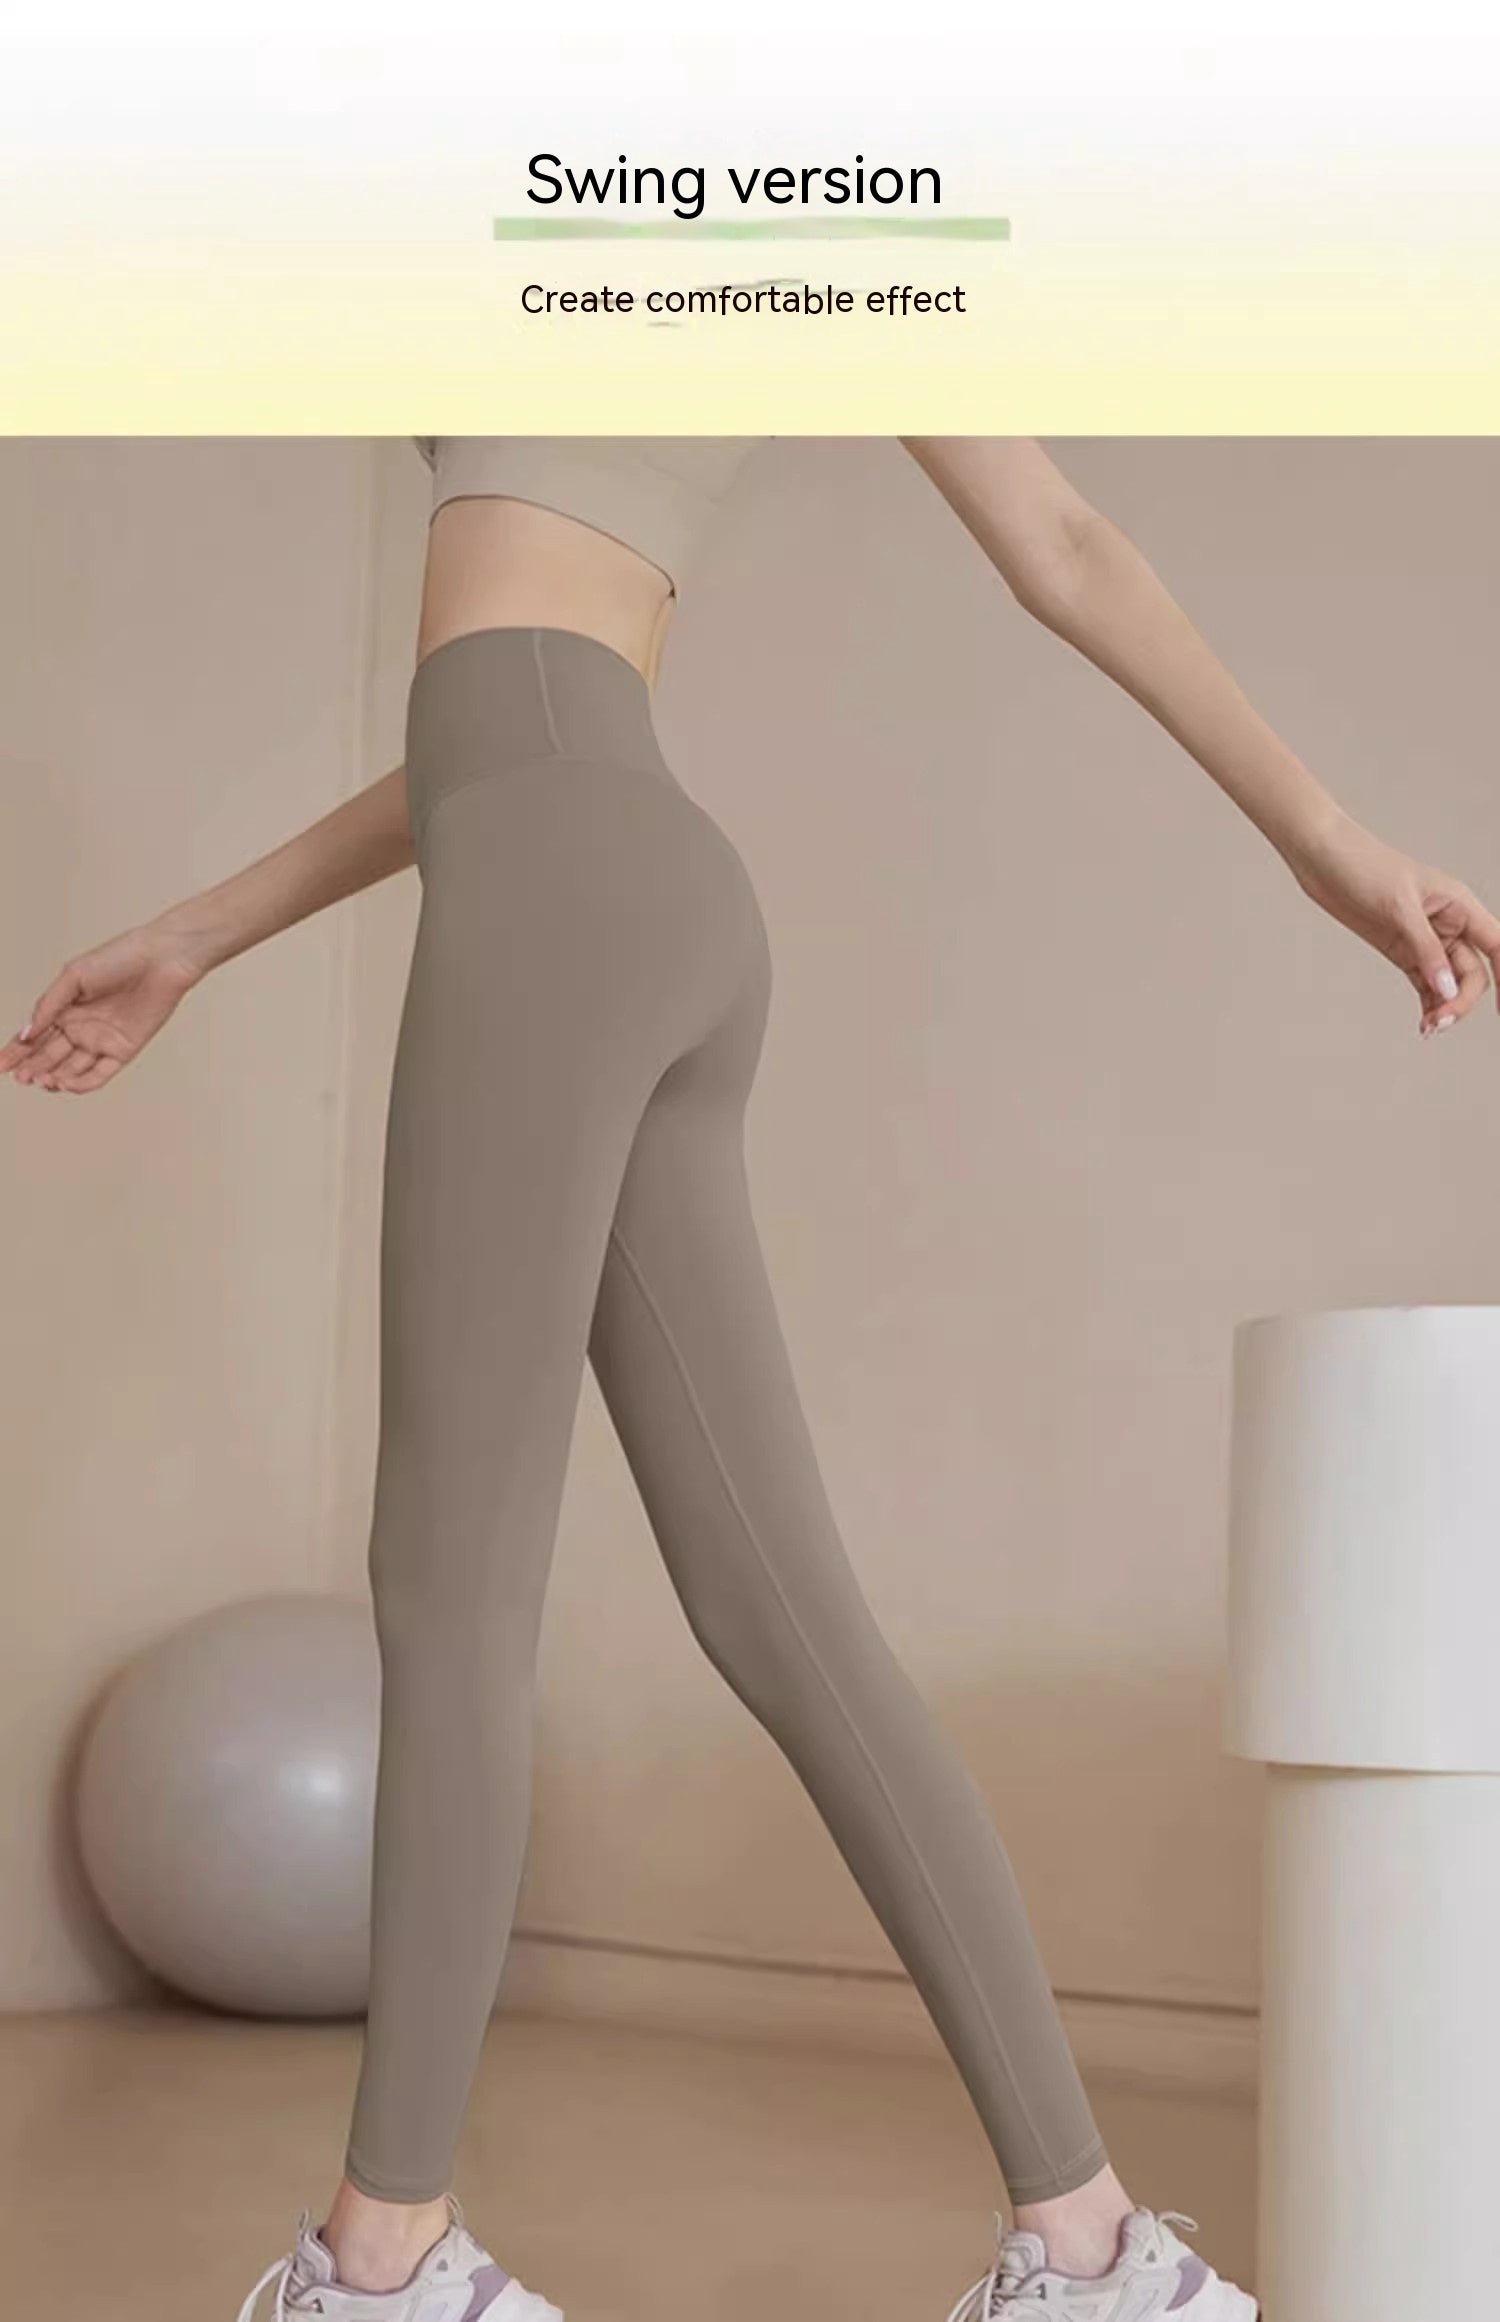 Yoga pants women's high waist hip-lifting fitness sports pants running yoga clothes professional peach hip stretch leggings suit